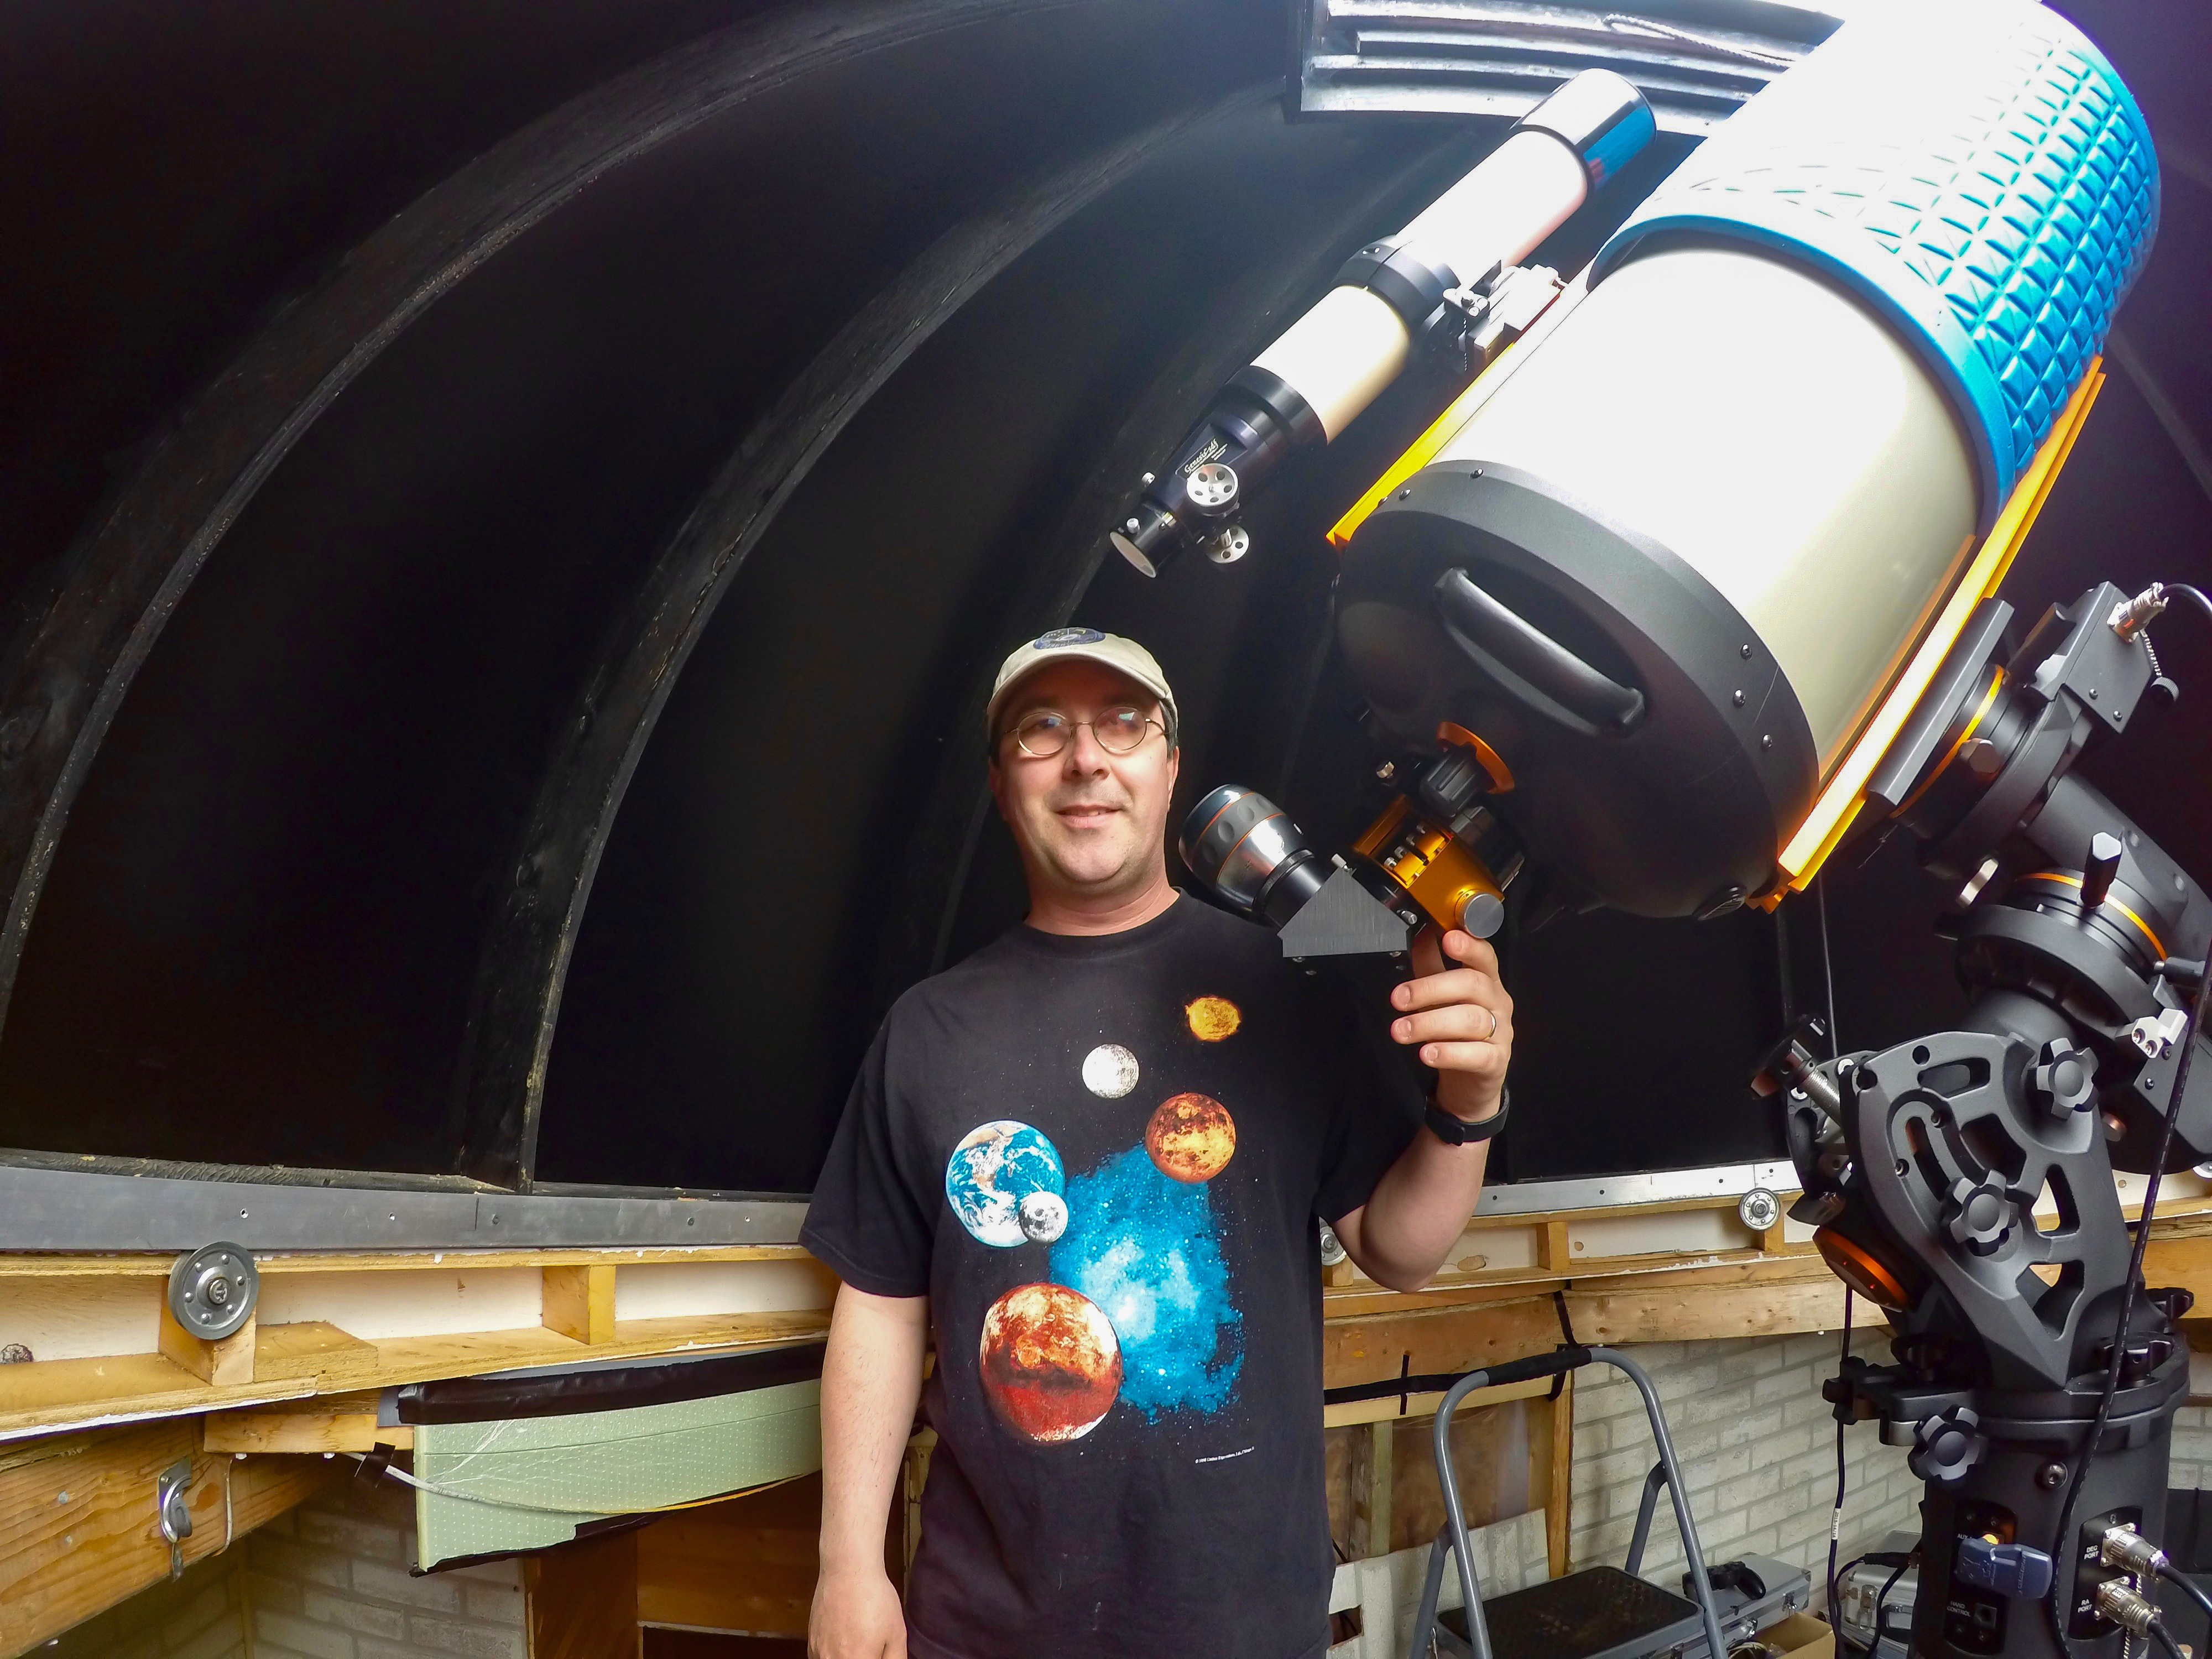 Visually Impaired Amateur Astronomer Helps Everyone See the Cosmos Space image image